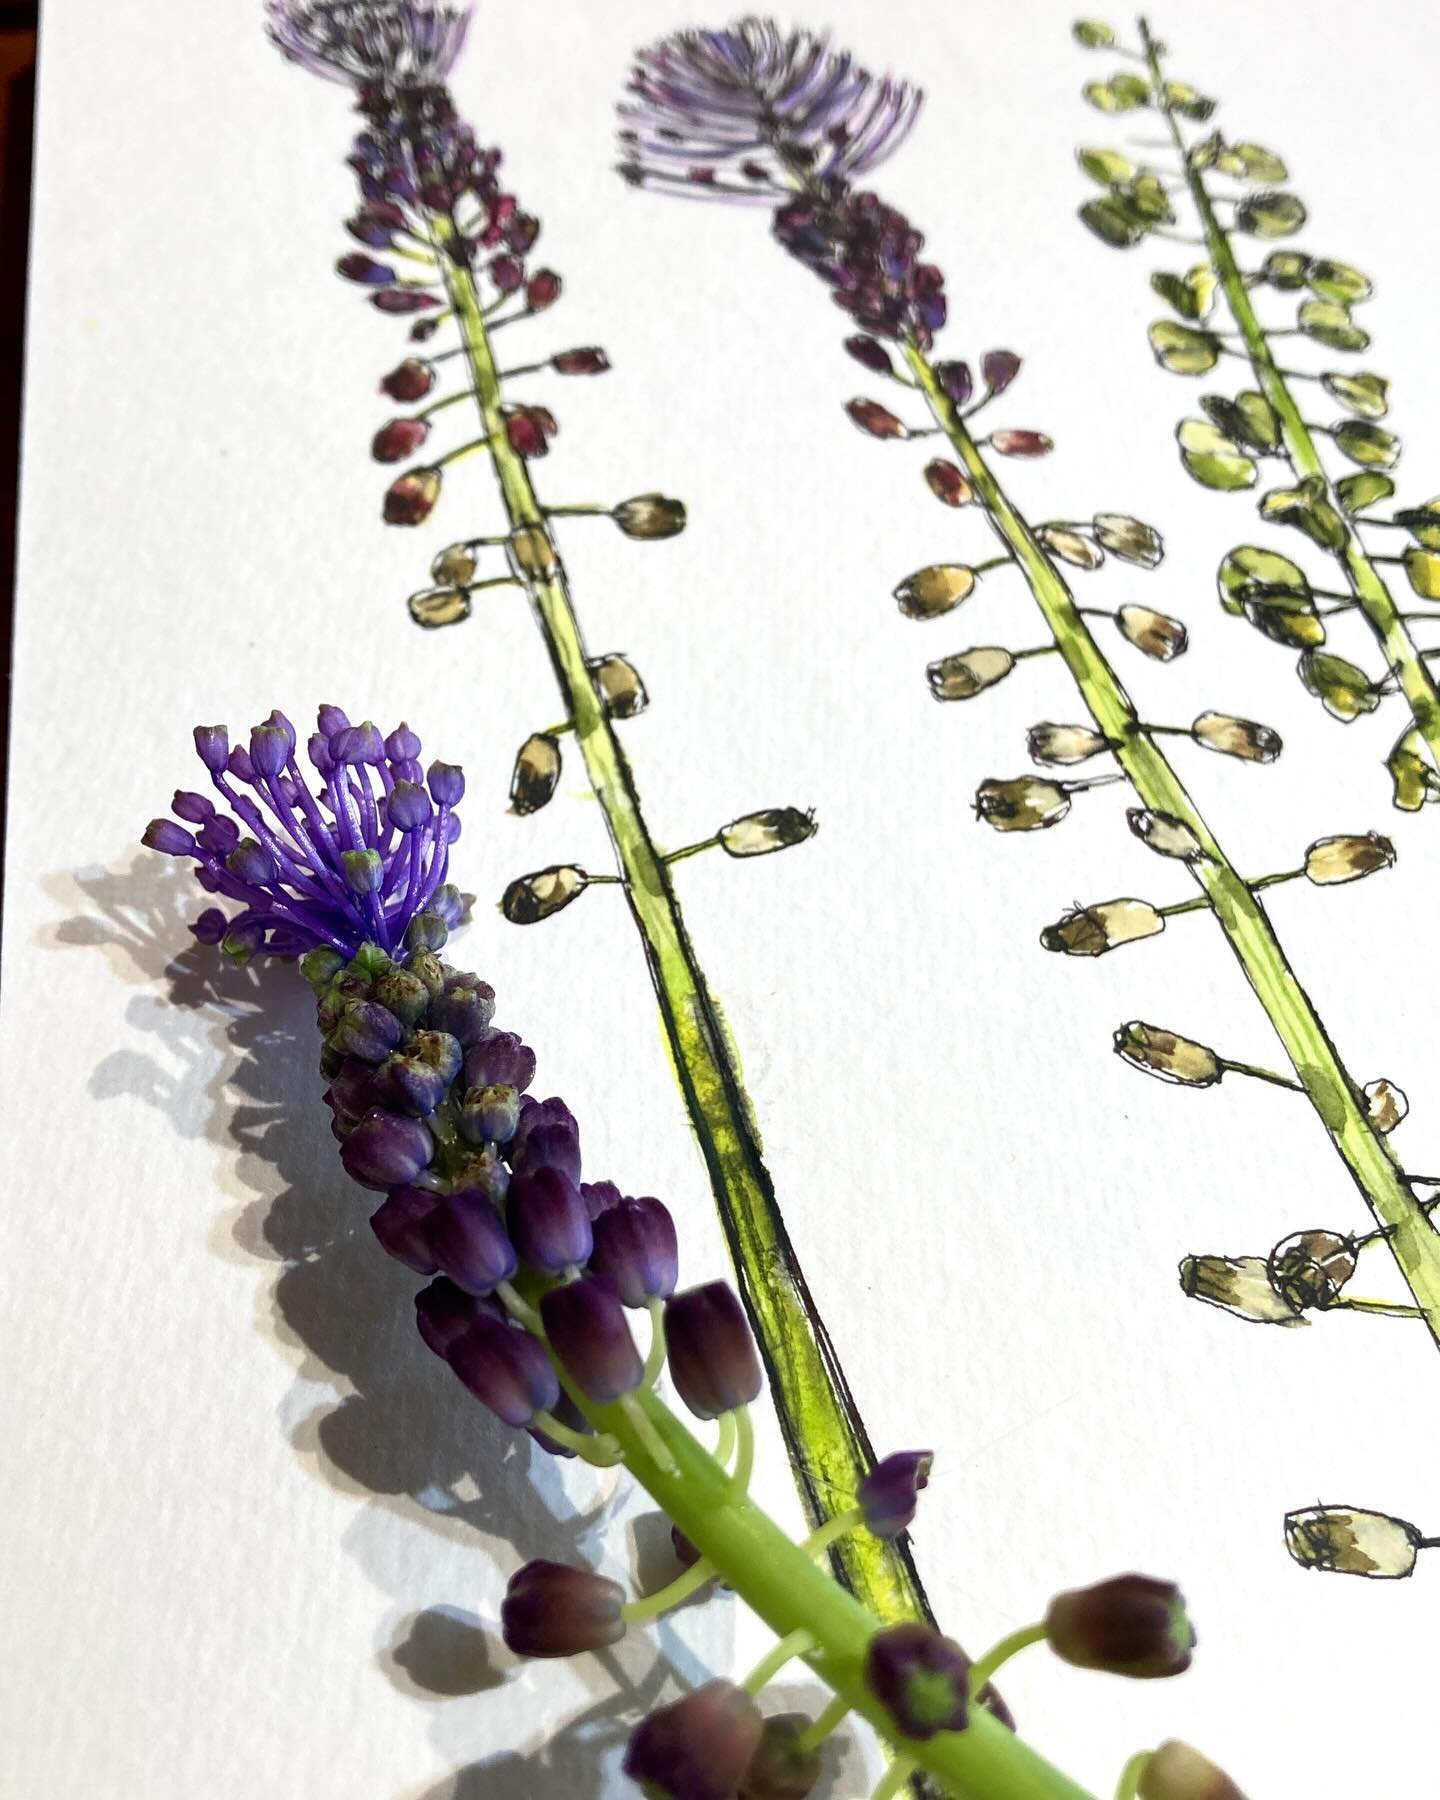 I love the weird and wonderful and this Muscari comosum is amongst the most unusual plants we&rsquo;ve grown in our garden. It keeps coming back year after year. I love the eccentricity of the flowers and the curious seed heads that follow. Great to 